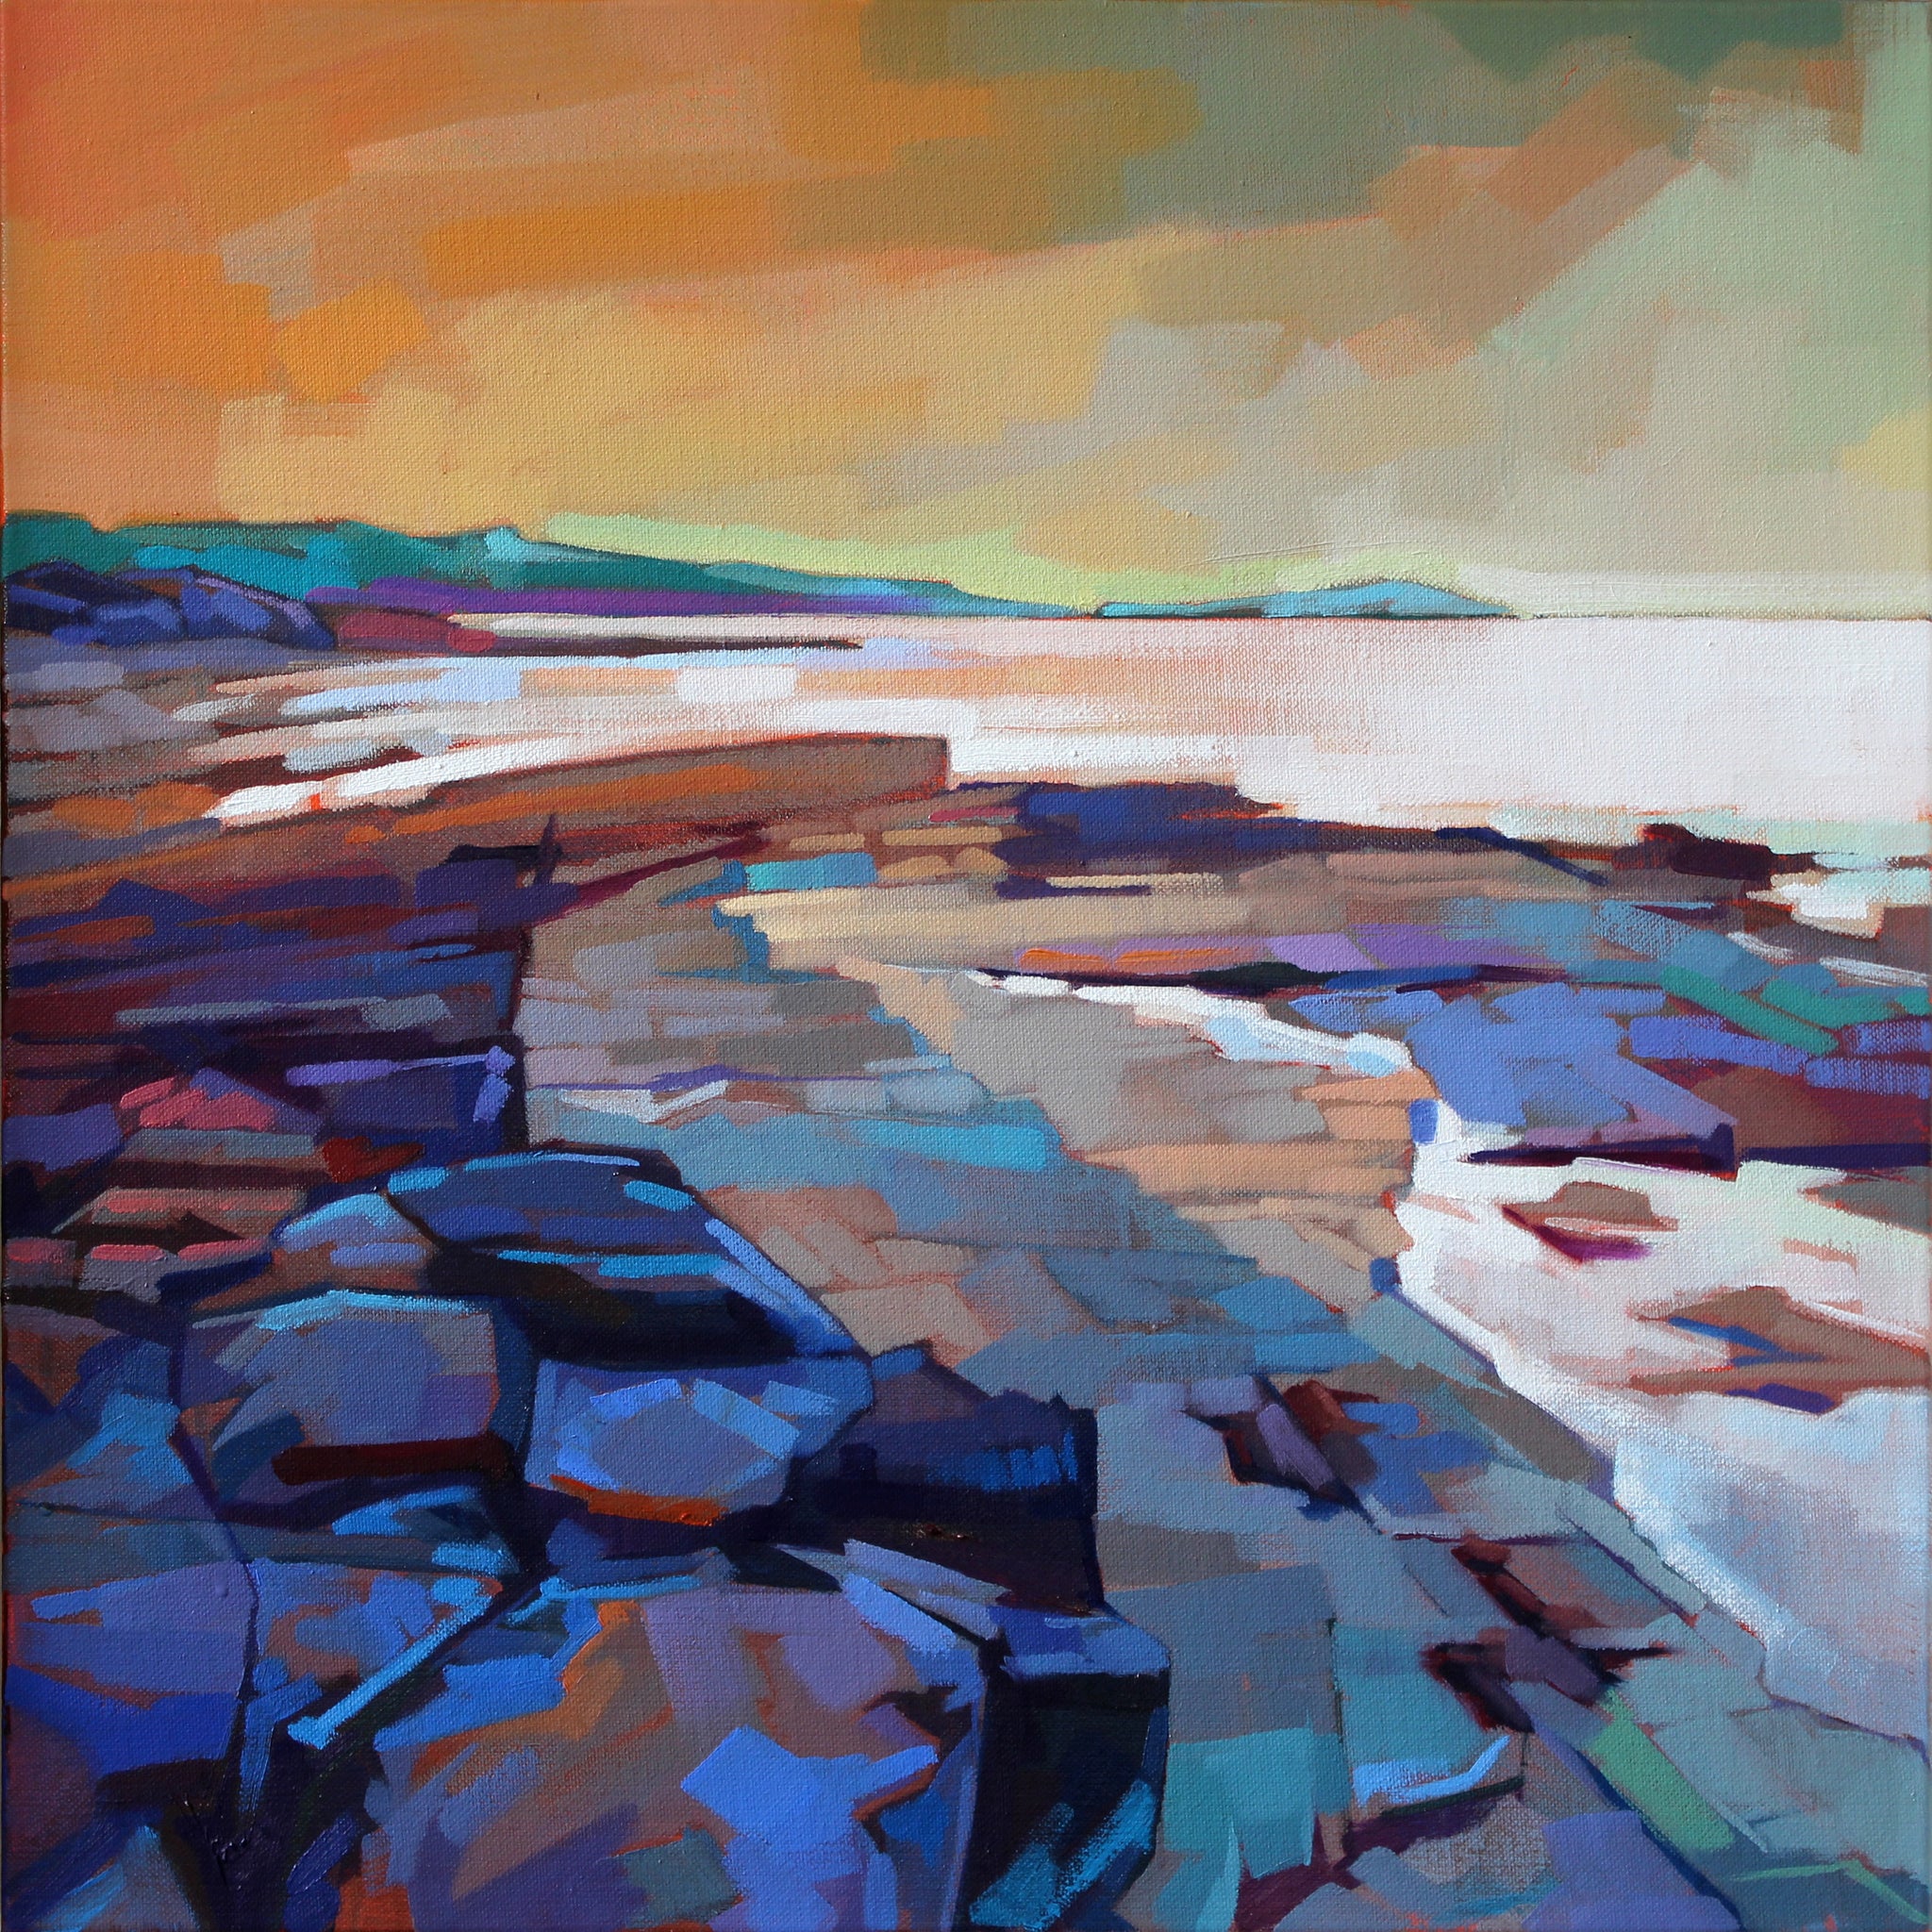 Rocks At Pampa II - Contemporary art from Ireland. Paintings & prints by Irish seascape & landscape artist Kevin Lowery.